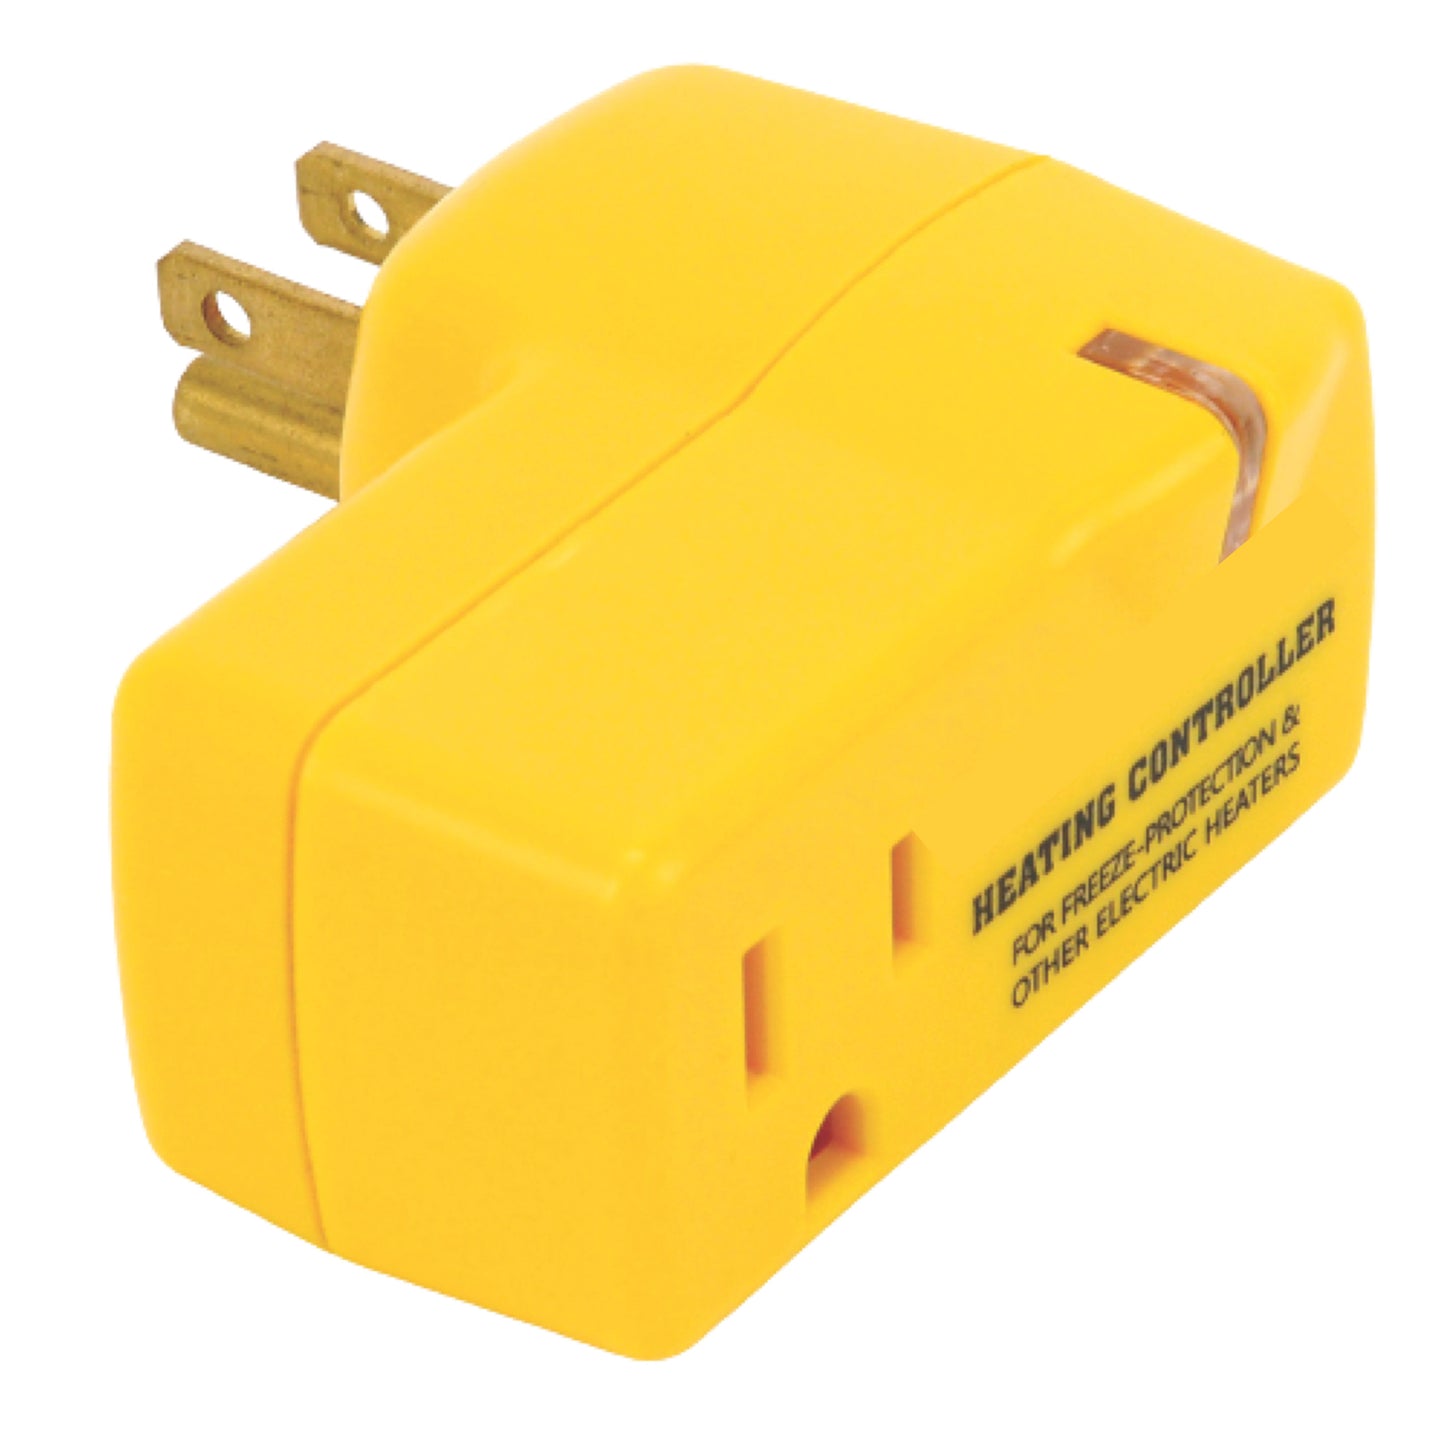 Thermocube thremostat activates at 3 ̊C/38 ̊C - Max 1800W for 120V